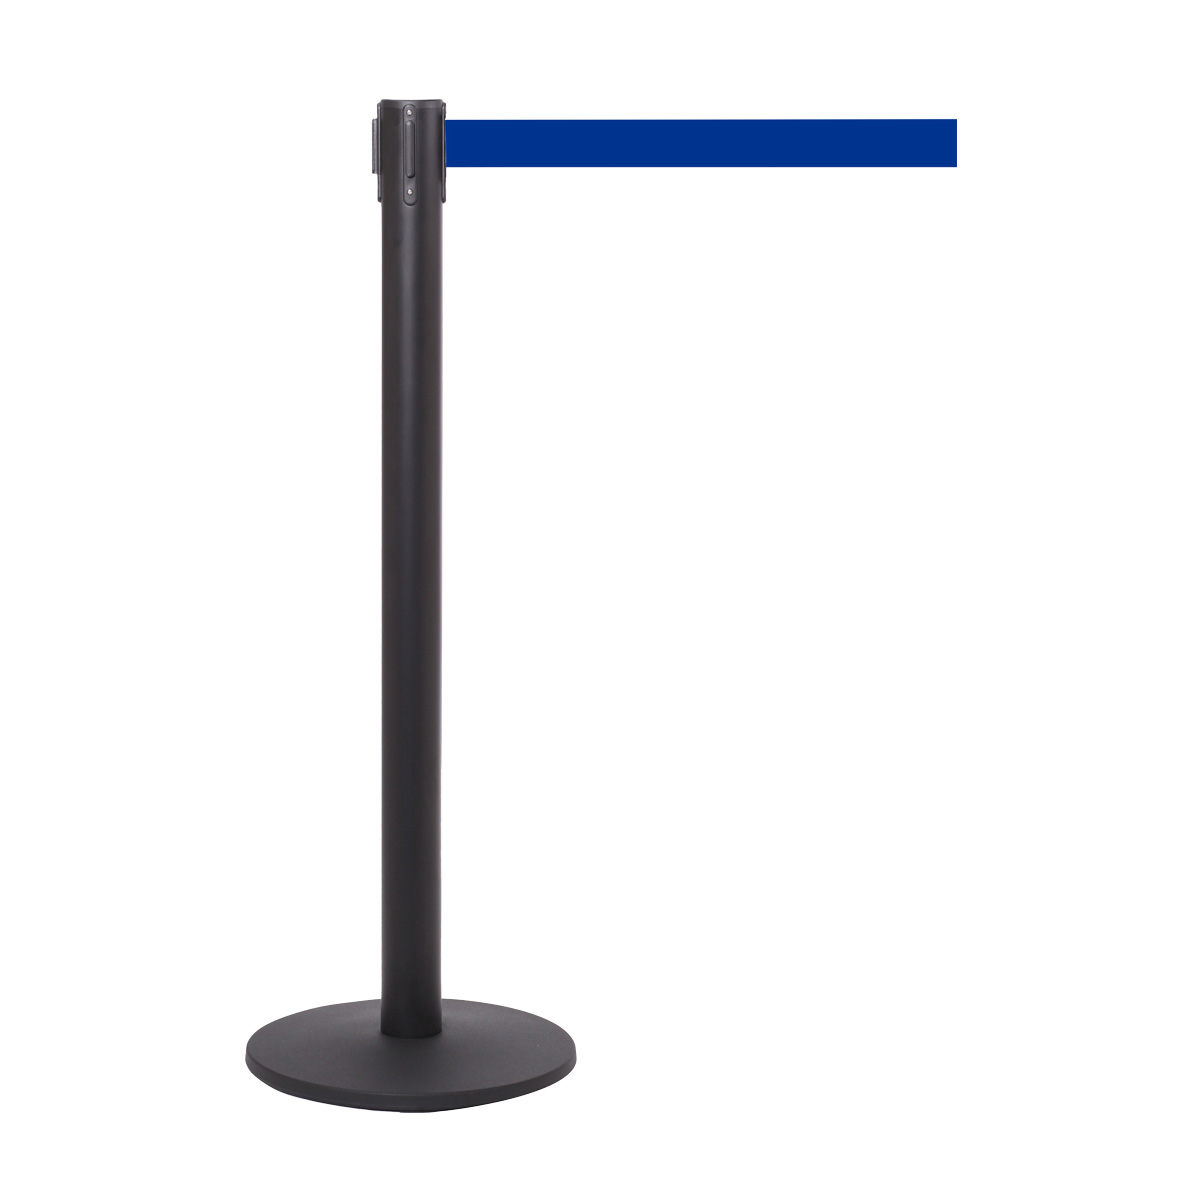 QueuePro Retractable Queue Barriers Are Highly Effective Queue Barriers With High Specification Belt Brake For Slow Retraction